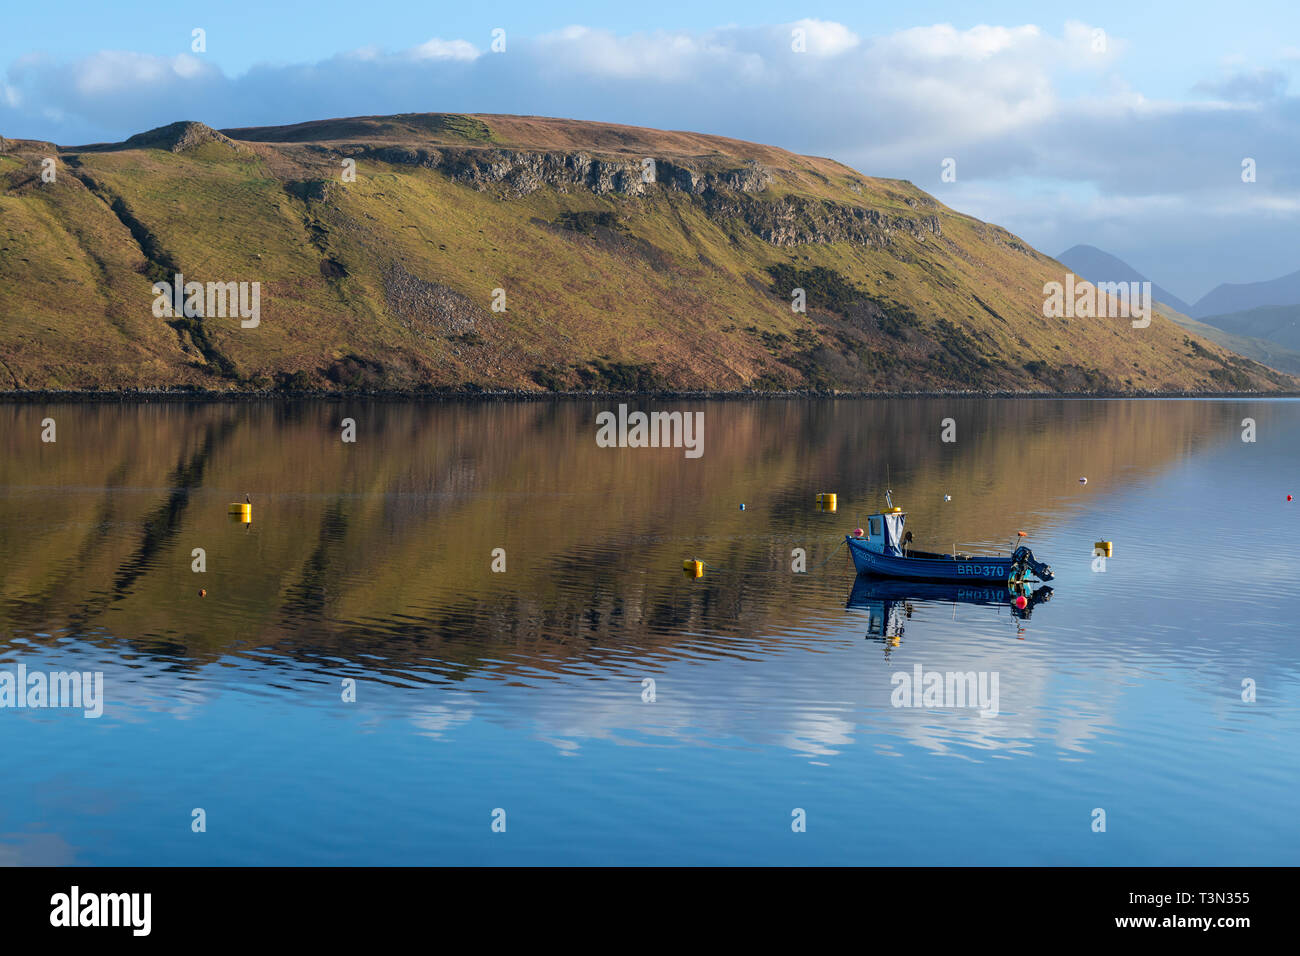 Colourful reflections in the calm water of Loch Harport on Isle of Skye, Highland Region, Scotland, UK Stock Photo